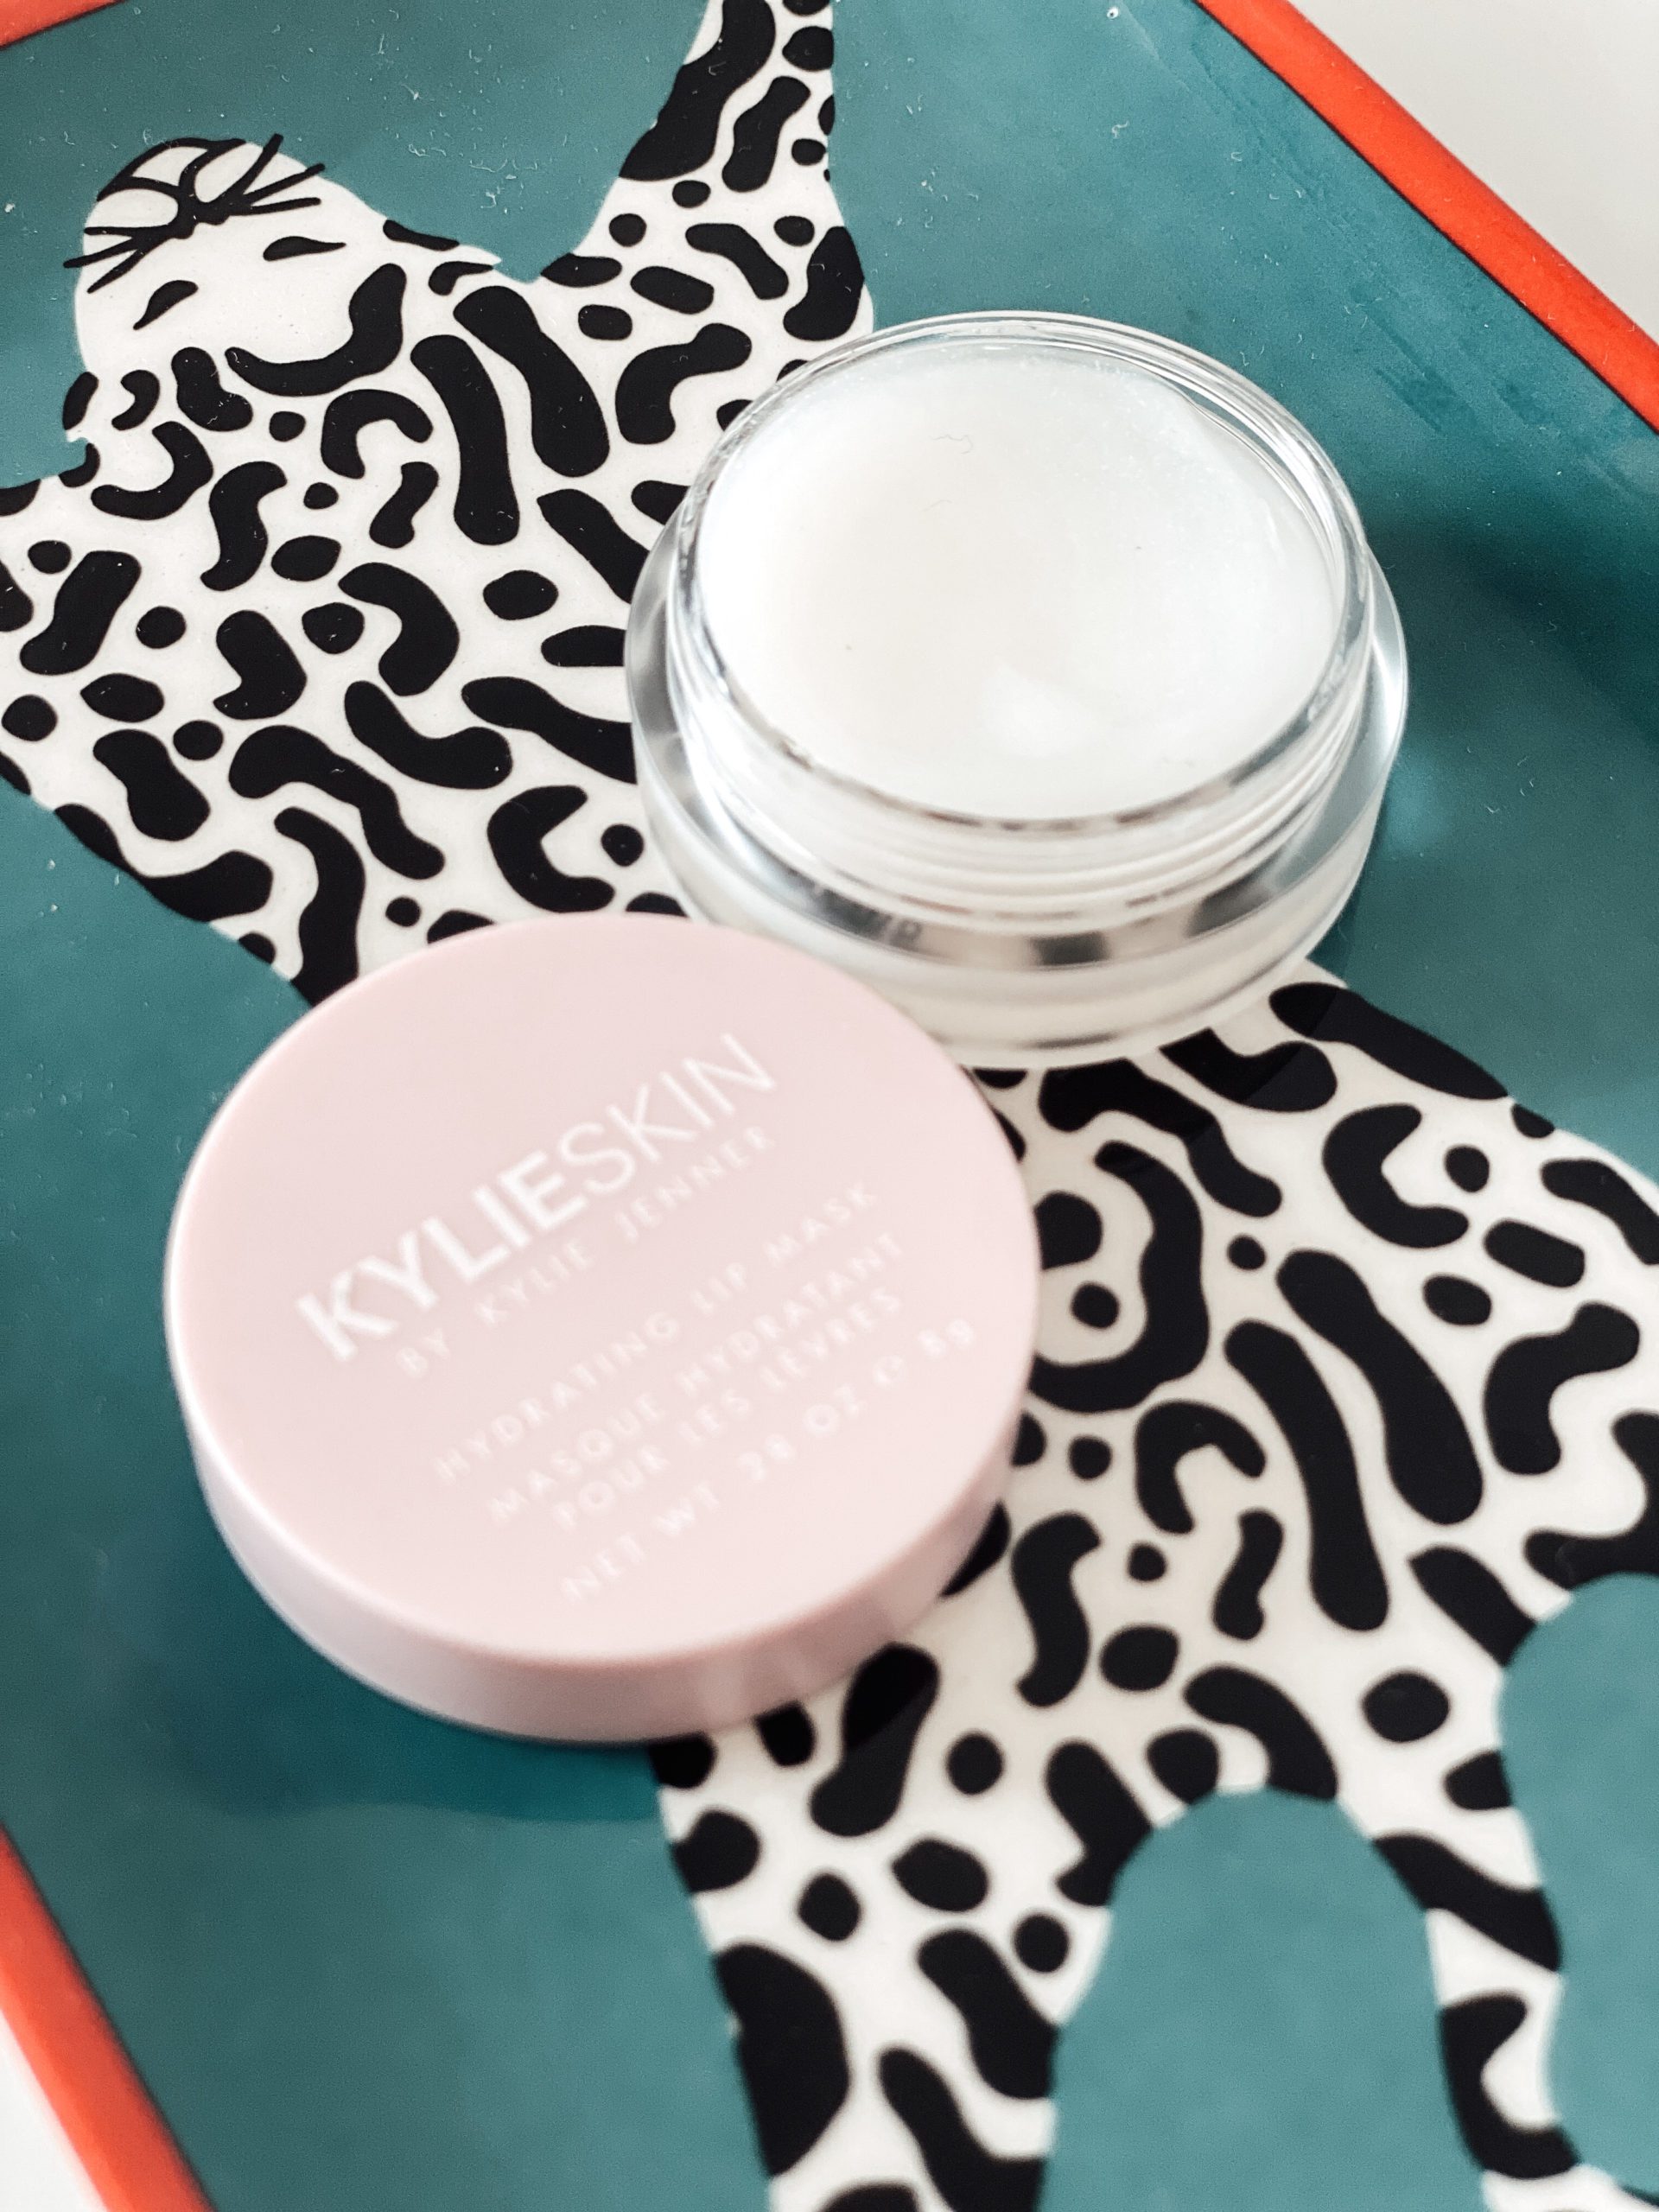 Kylie Skin Hydrating Lip Mask Review